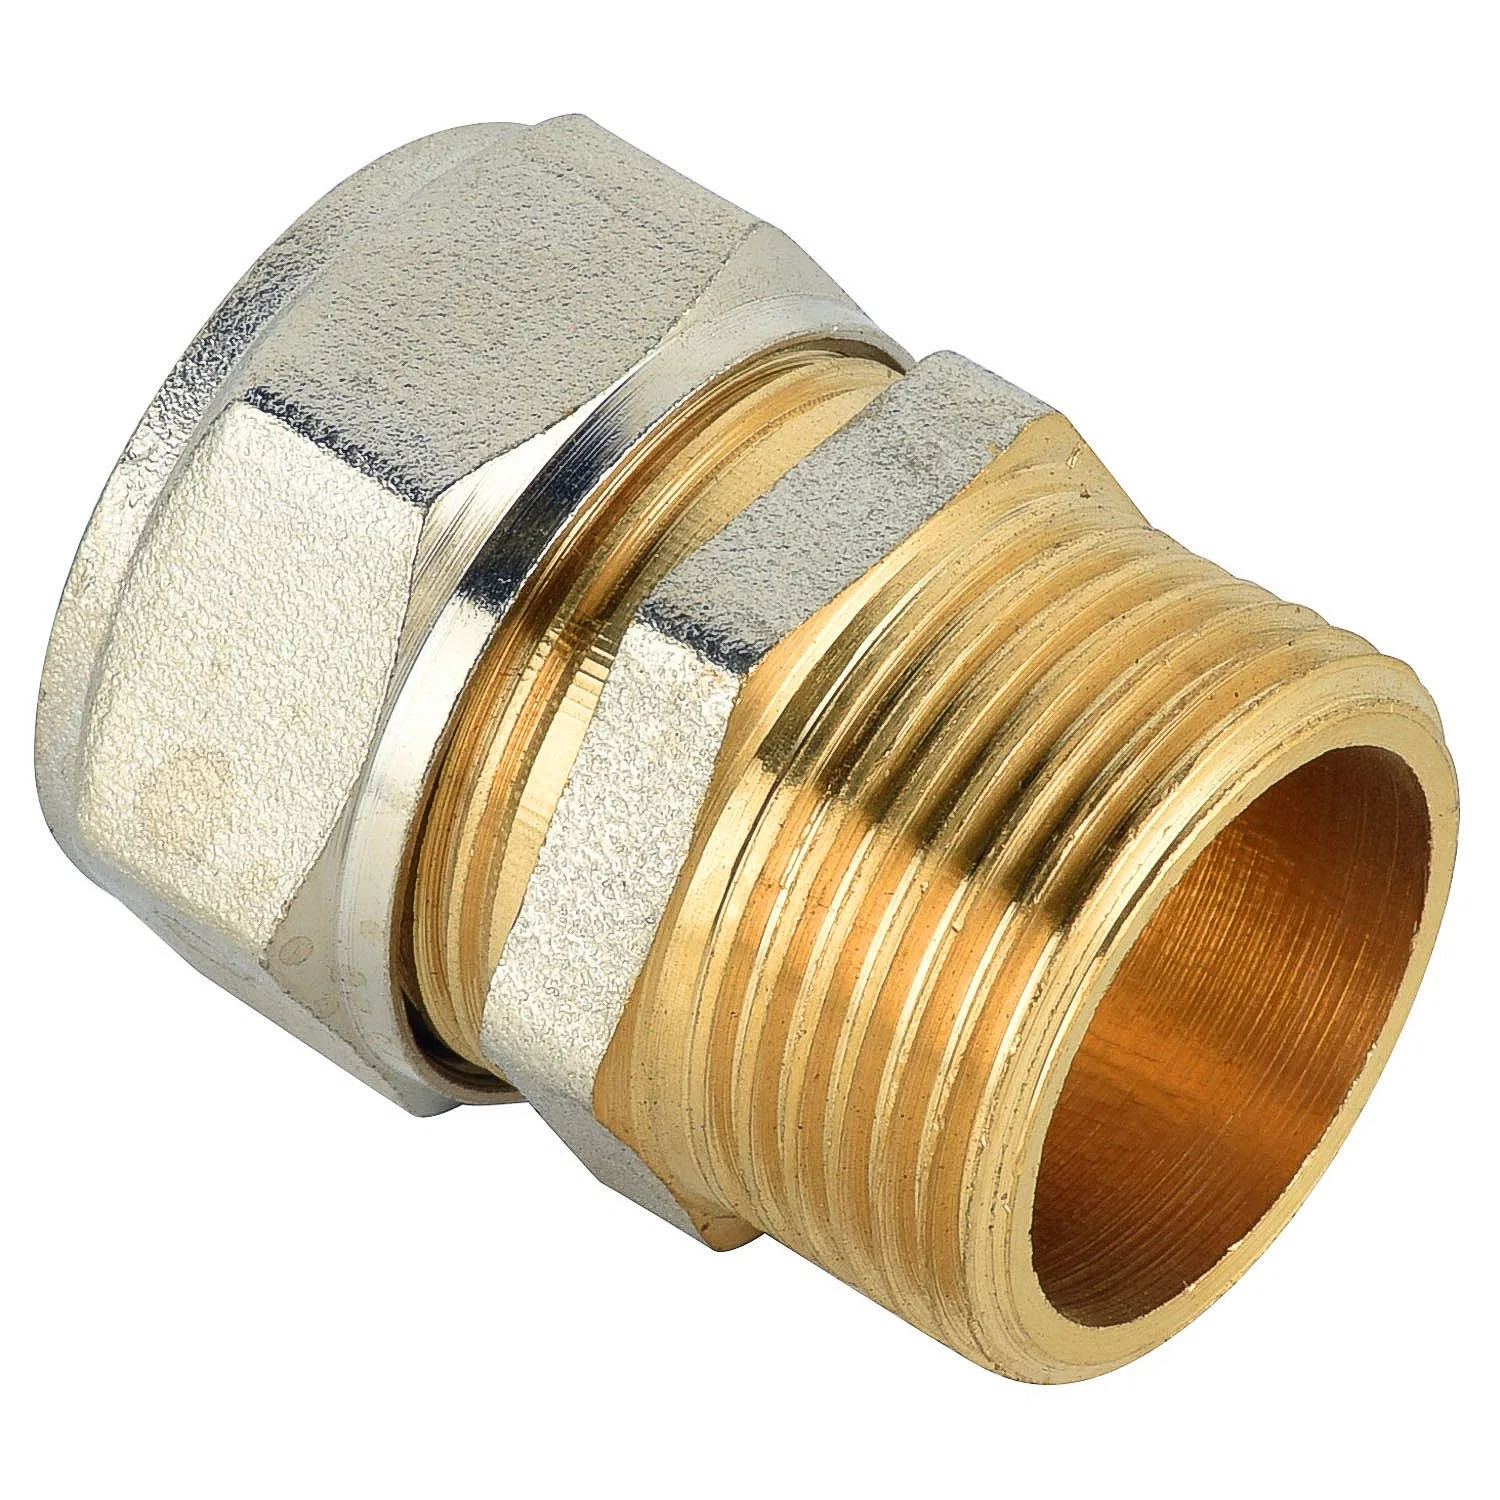 Brass Compression Fitting Brass Elbow Pex Pipe Fitting Water Tubing Pex Compression Fitting